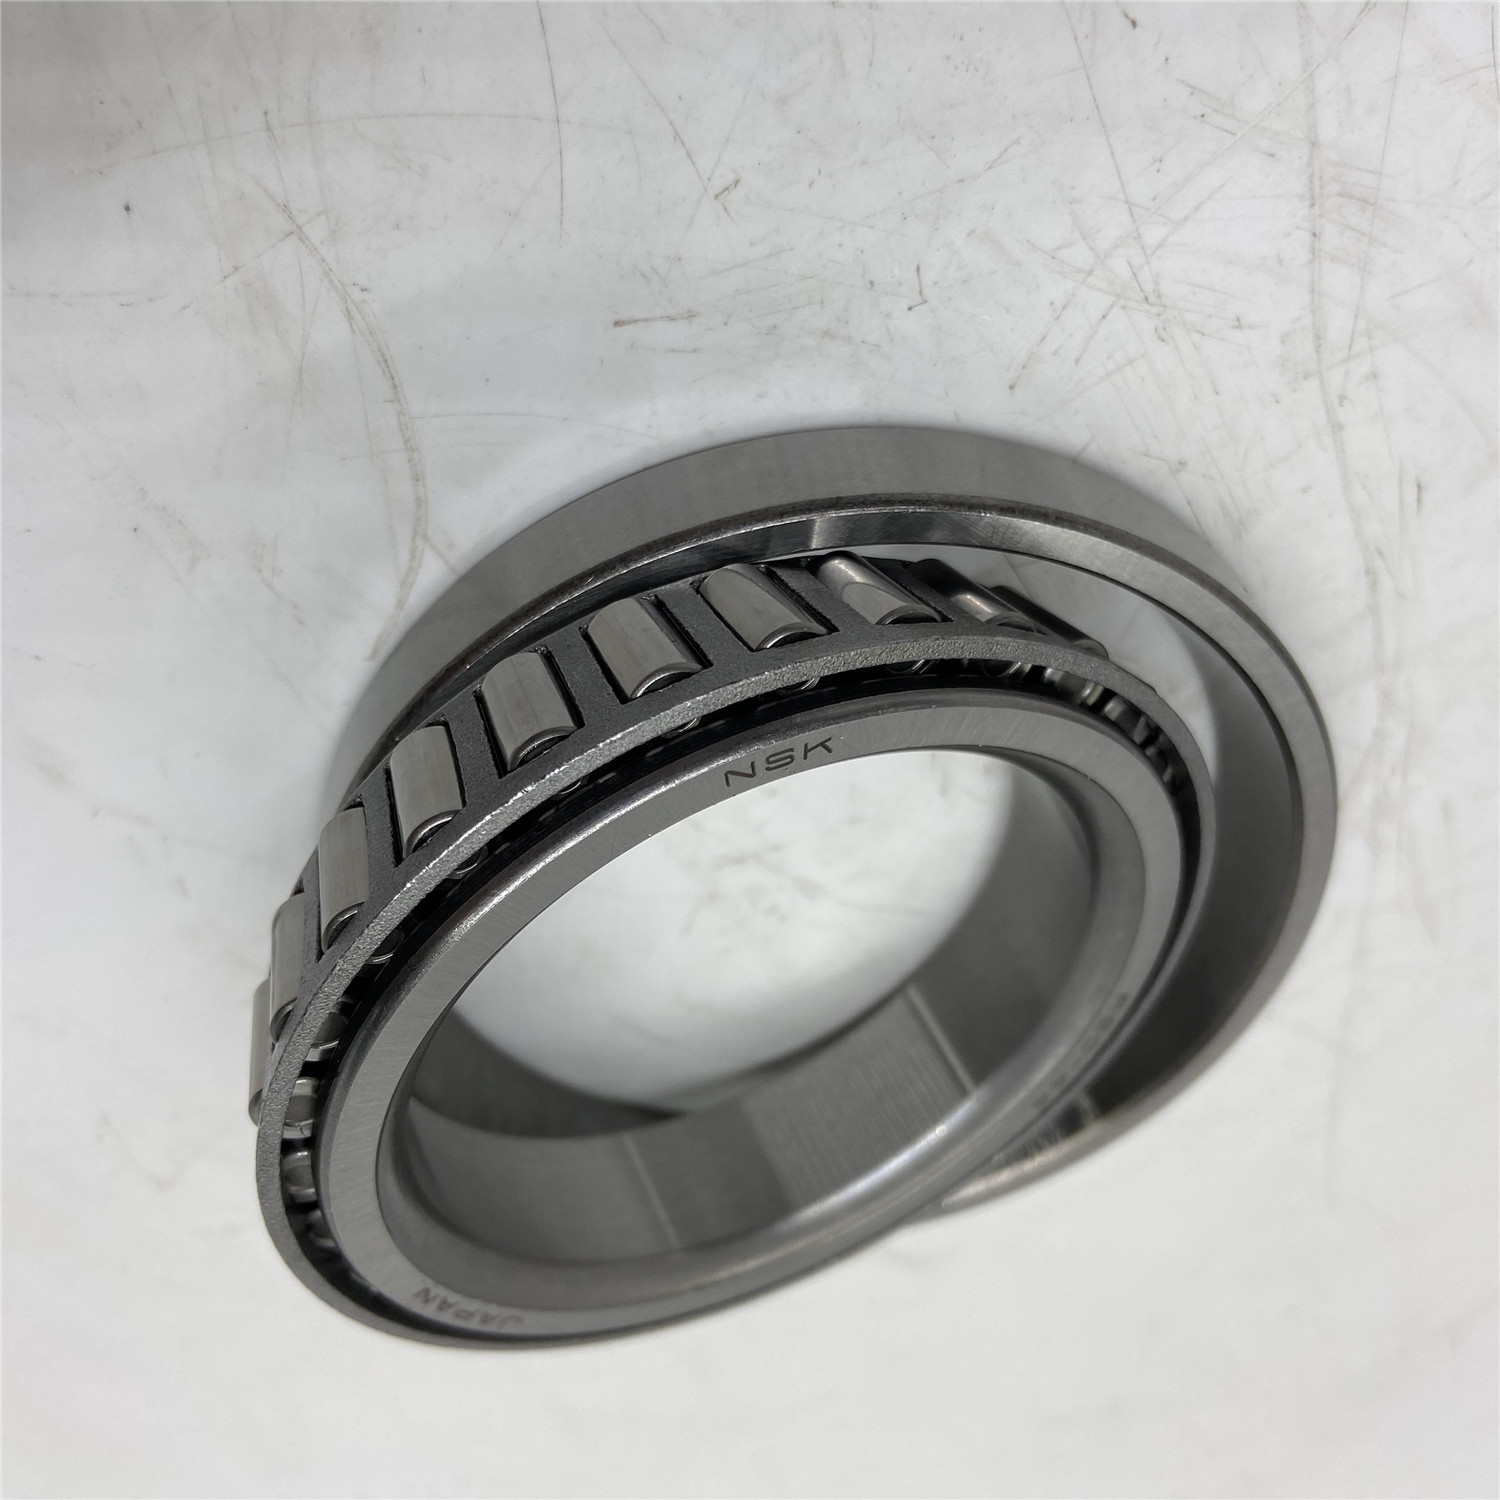 ZC-0046-OEM NSK R60-44 Automobile Bearing / Tapered Roller Bearing 60x90x12.5/17mm